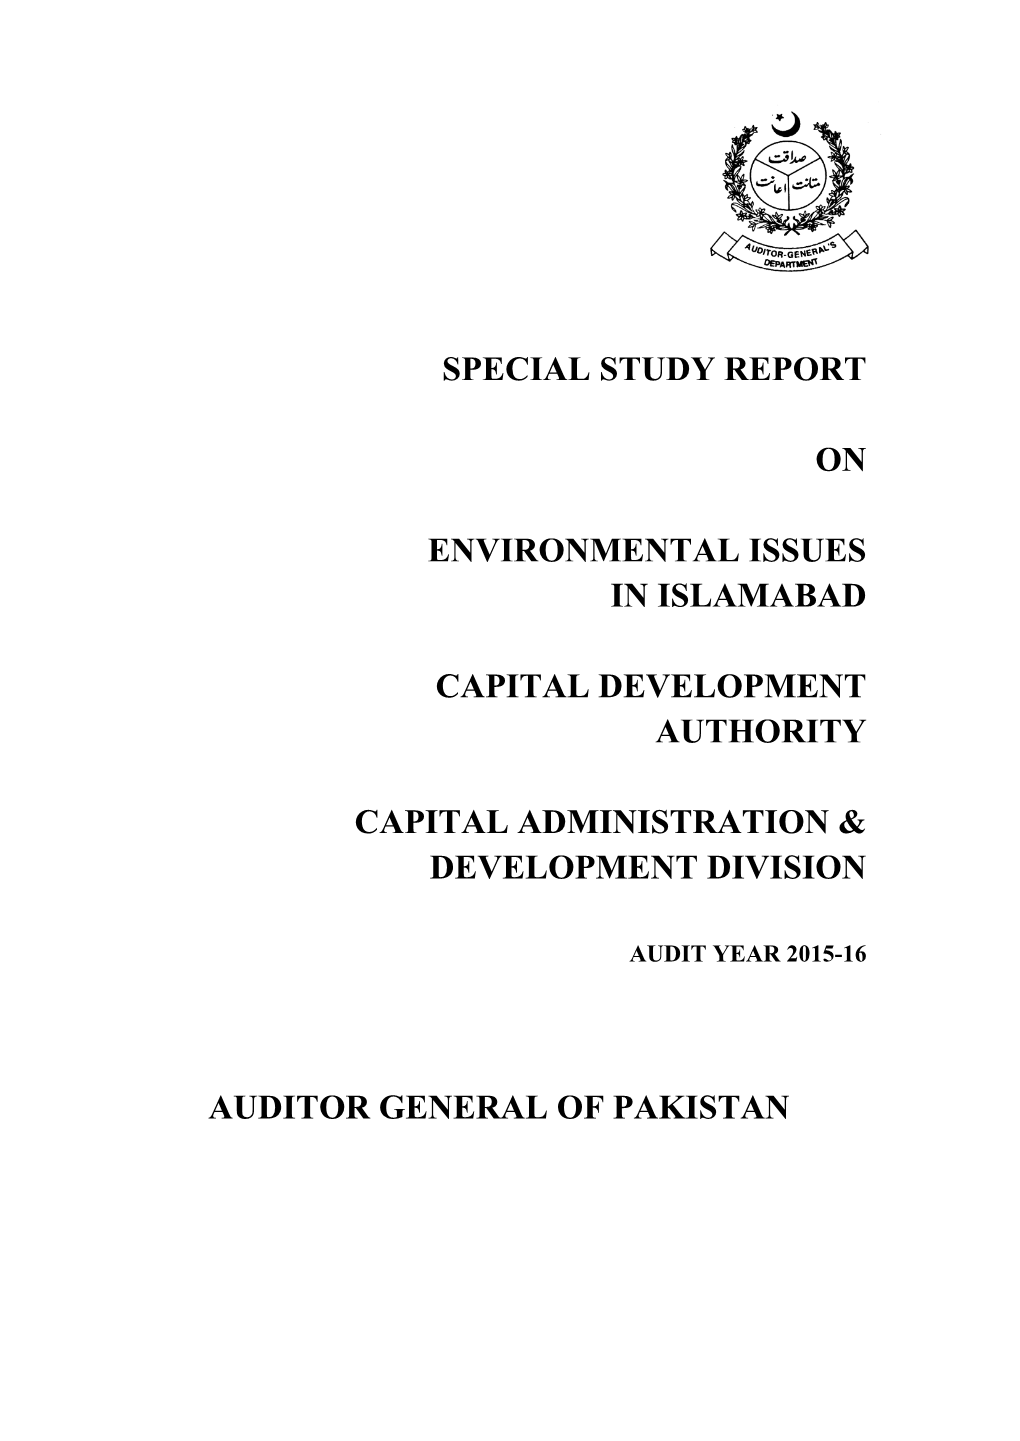 Special Study Report on Environmental Issues in Islamabad Capital